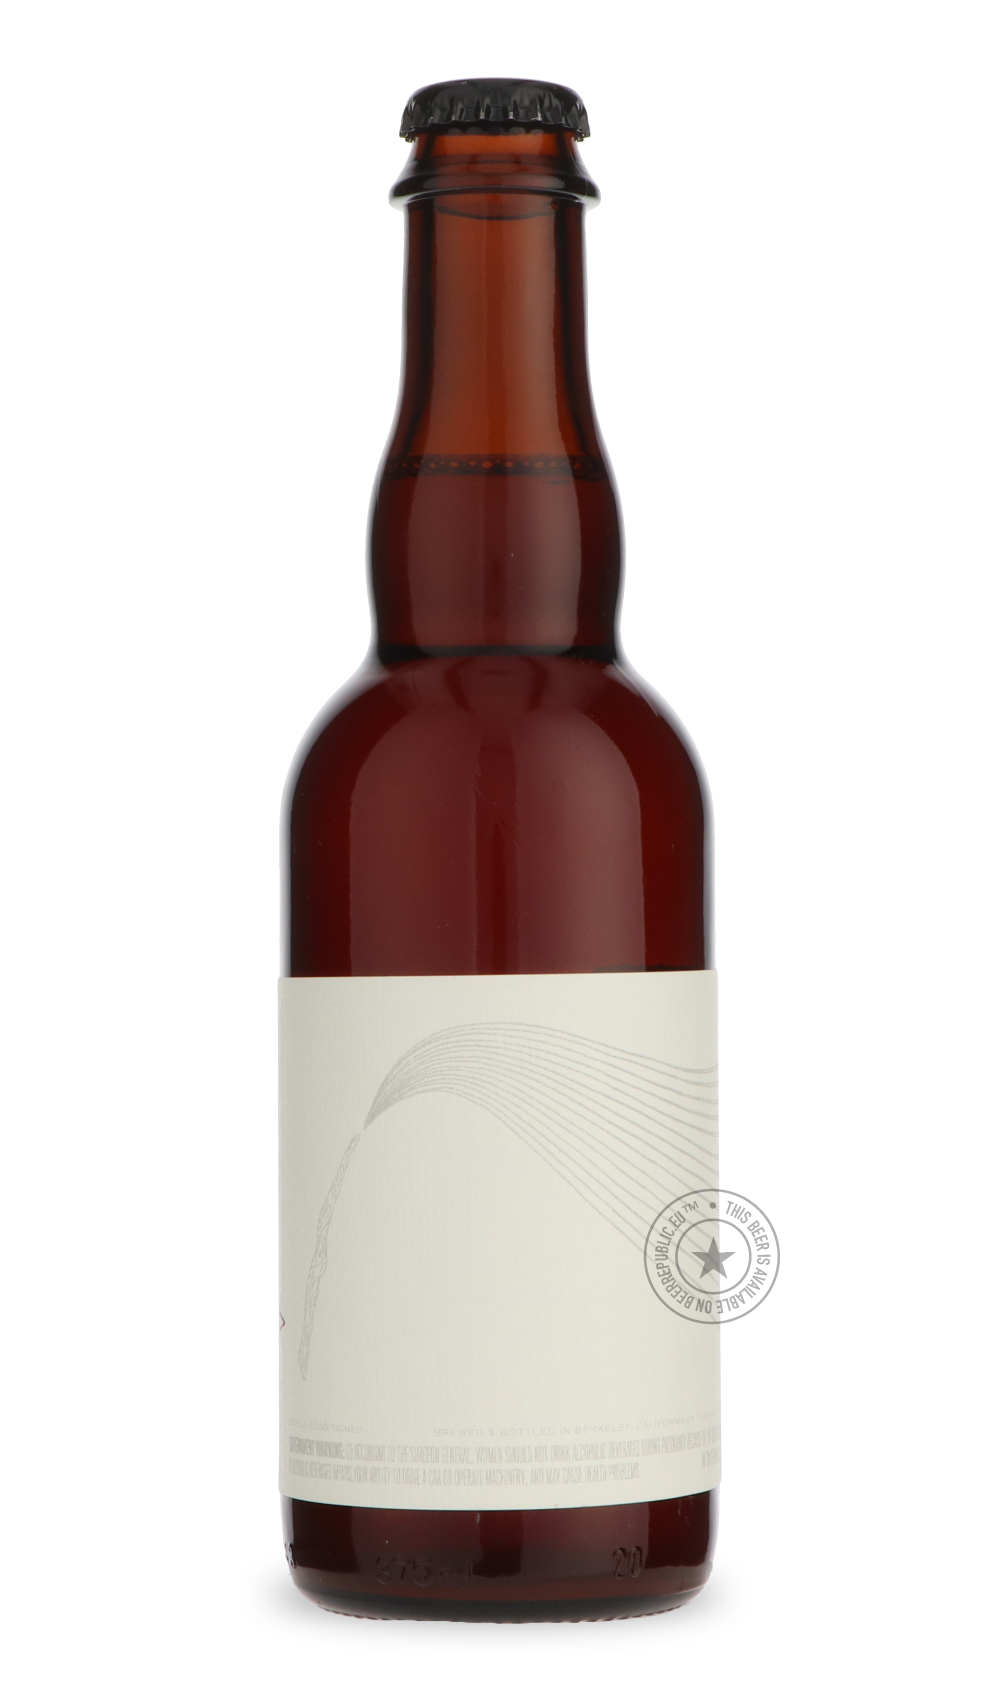 -The Rare Barrel- Ensnare the Senses 2020-Sour / Wild & Fruity- Only @ Beer Republic - The best online beer store for American & Canadian craft beer - Buy beer online from the USA and Canada - Bier online kopen - Amerikaans bier kopen - Craft beer store - Craft beer kopen - Amerikanisch bier kaufen - Bier online kaufen - Acheter biere online - IPA - Stout - Porter - New England IPA - Hazy IPA - Imperial Stout - Barrel Aged - Barrel Aged Imperial Stout - Brown - Dark beer - Blond - Blonde - Pilsner - Lager -